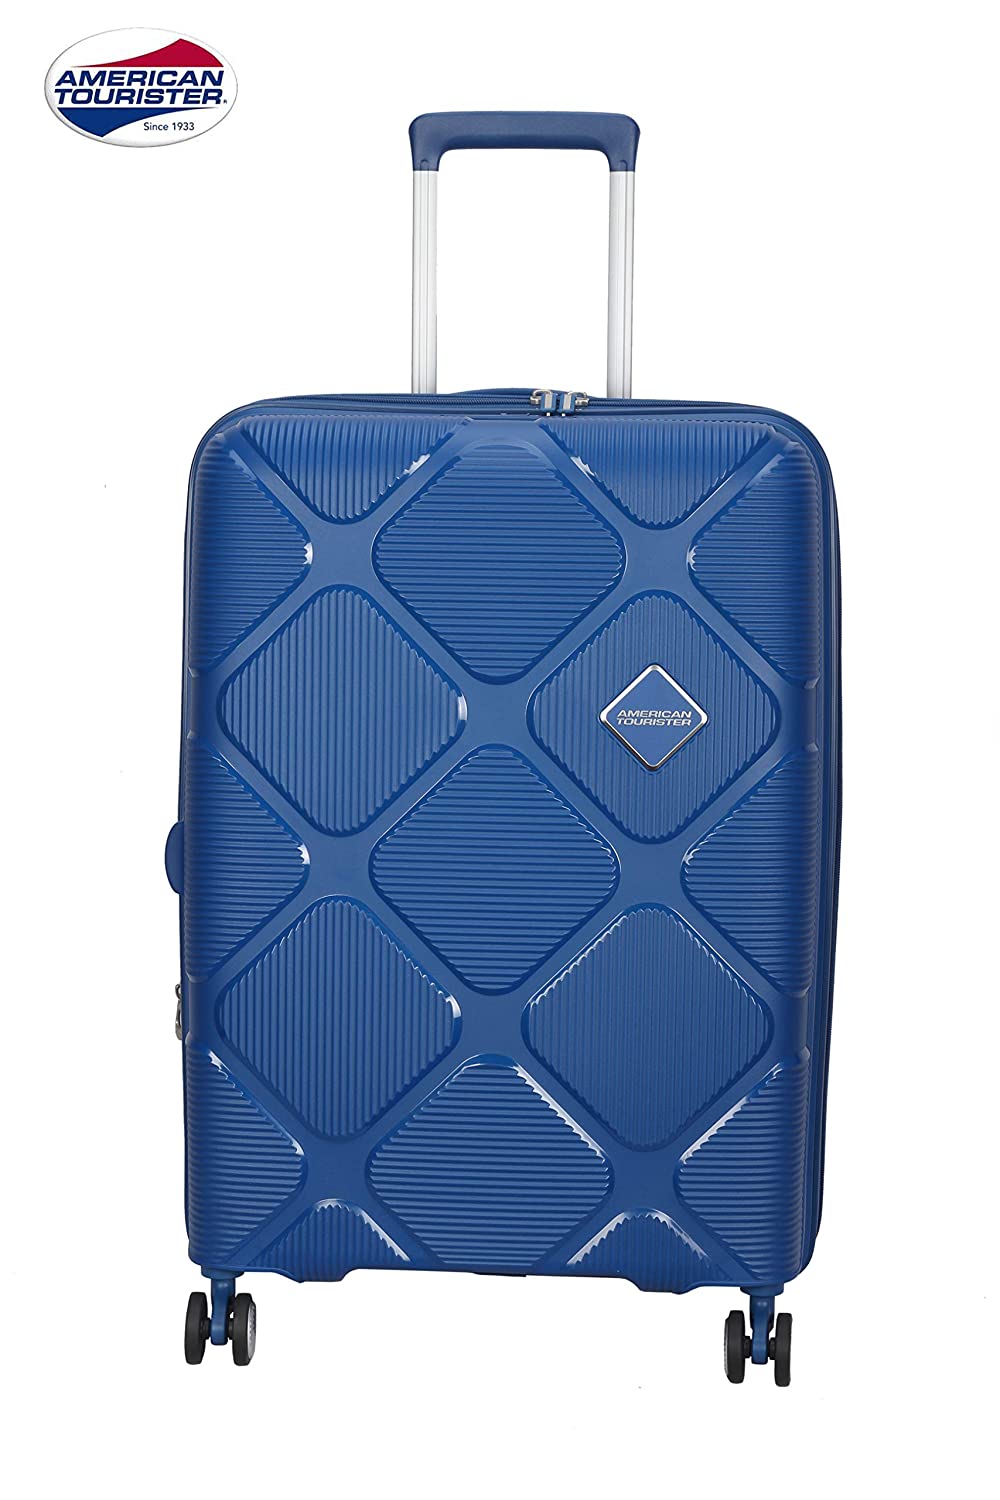 Safari Antitheft Trolley Luggage Bag, Set, Small, Medium & Large Size, 8  Wheel Travel Luggage for Men and Women, Cabin and Check-in Set of 3 Sizes,  81cm, 71cm & 59cm, Blue :